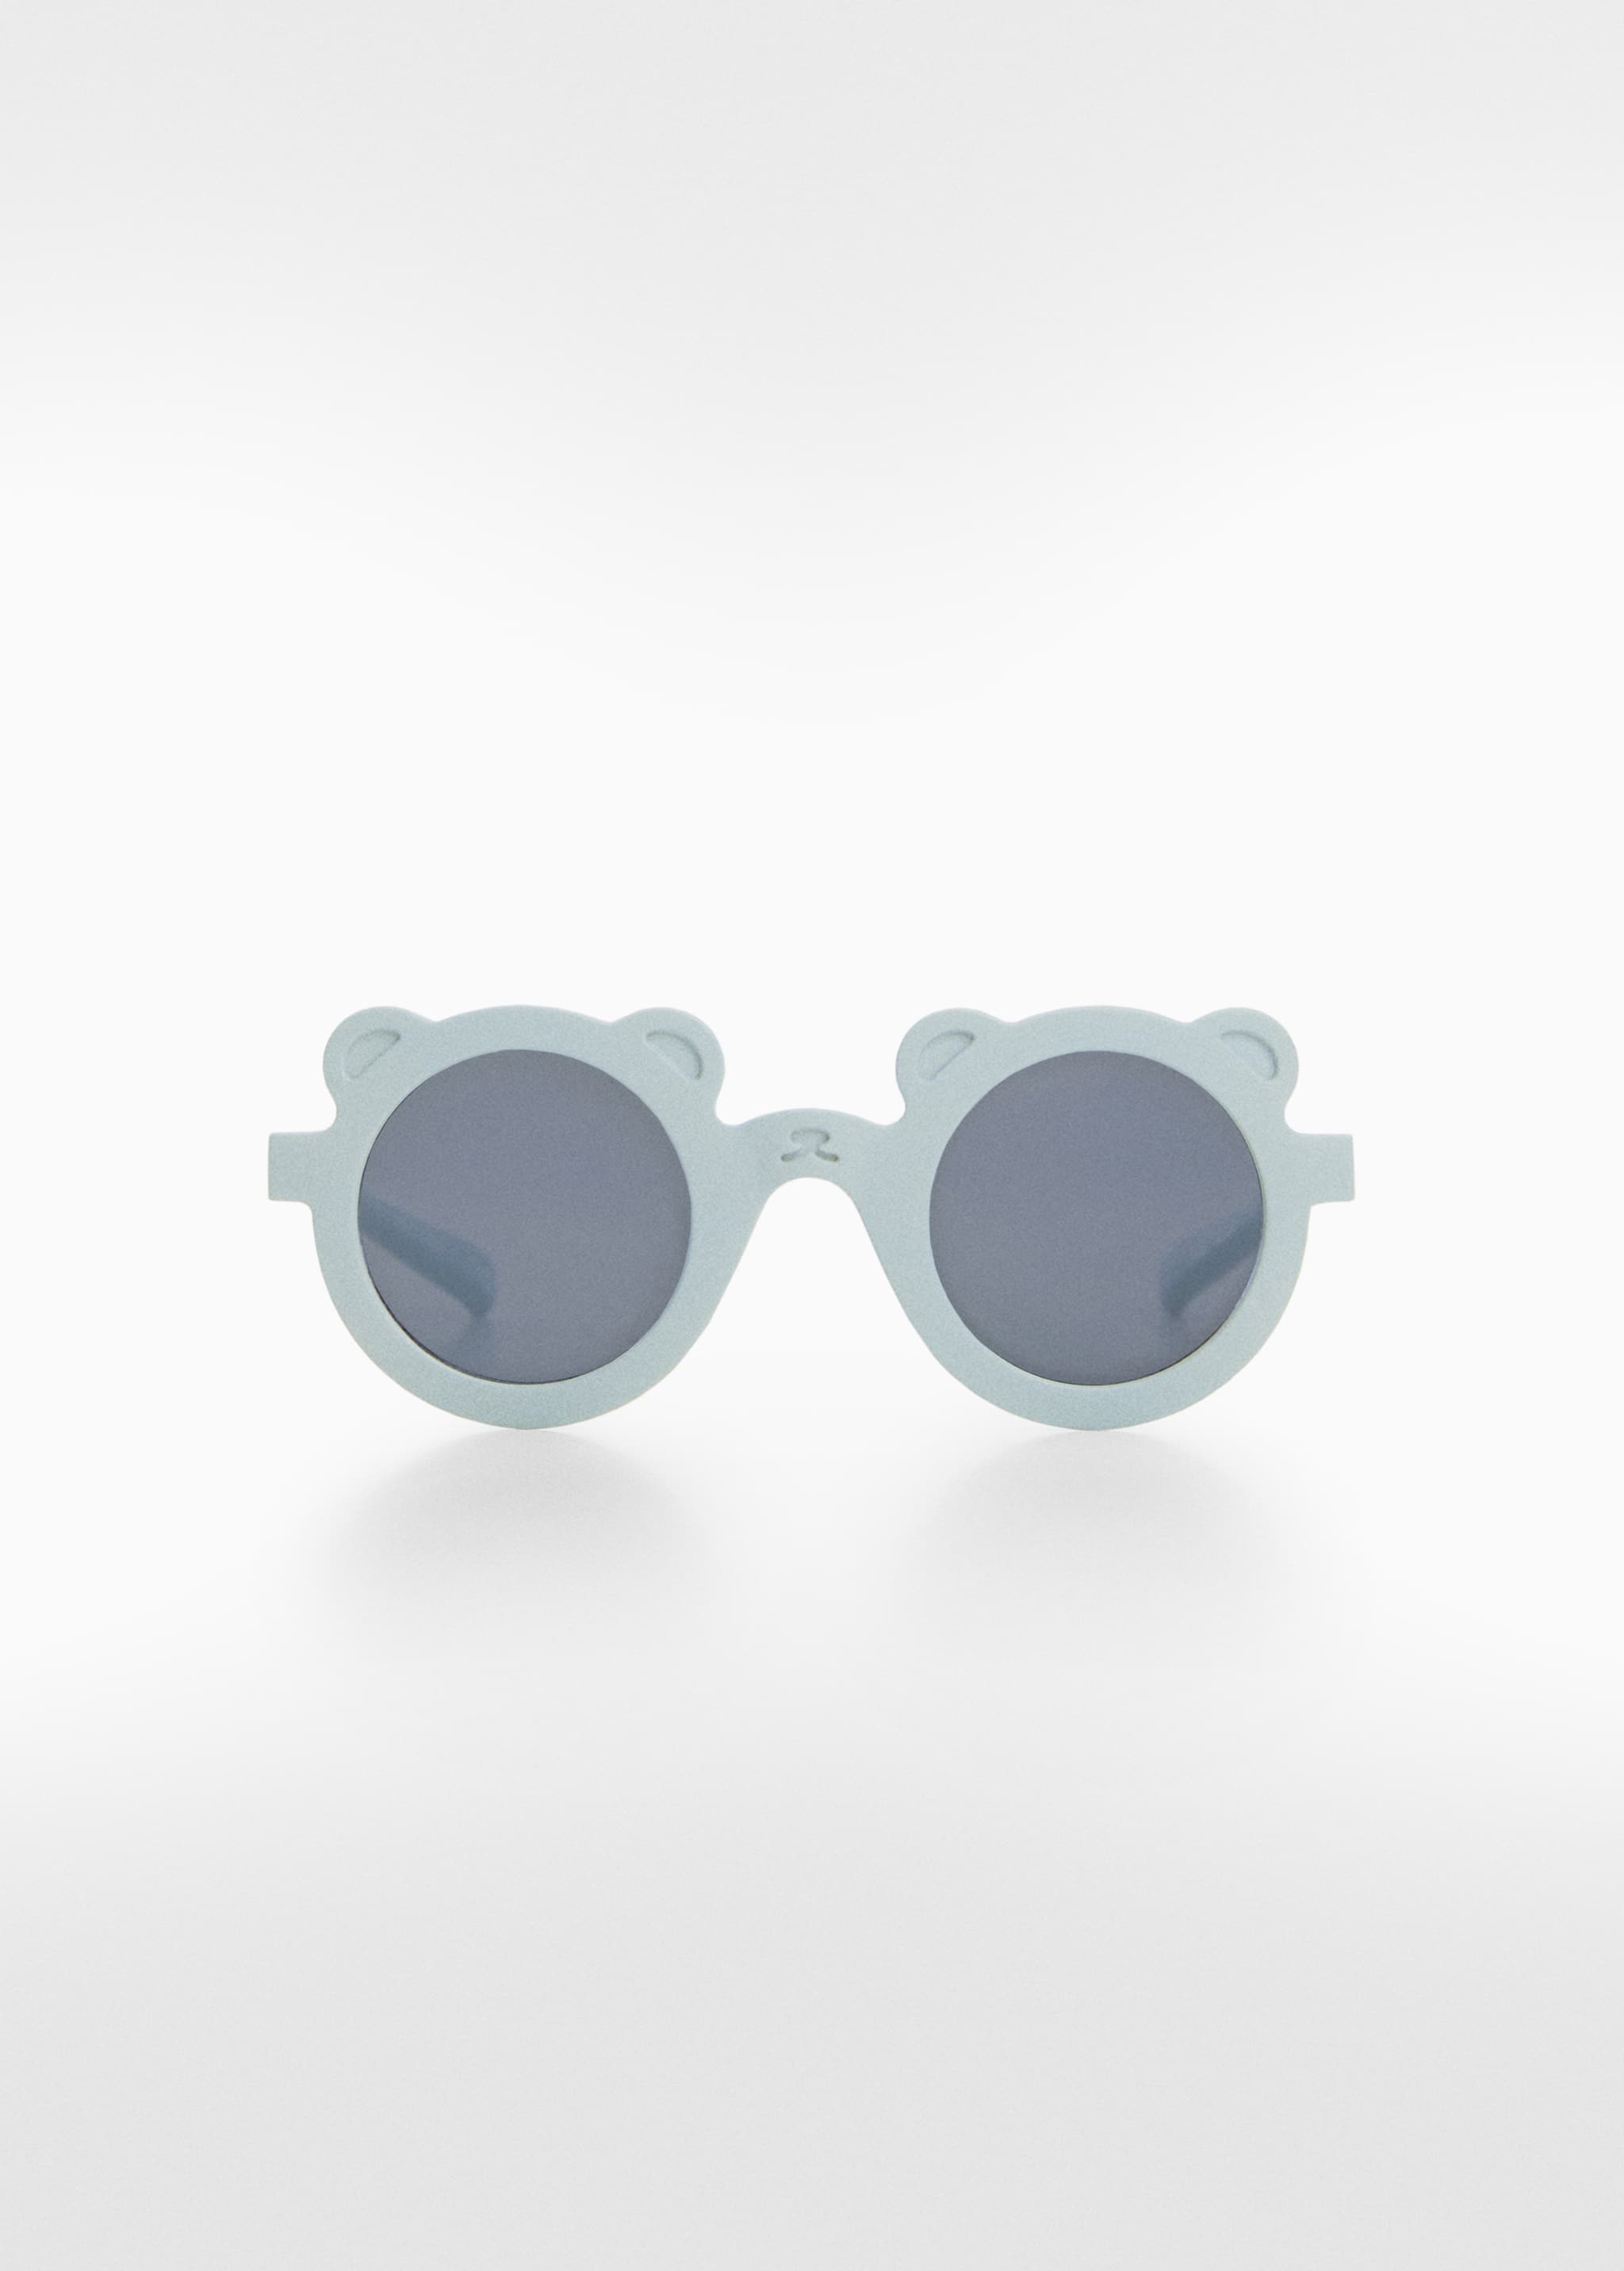 Teddy bear sunglasses - Article without model